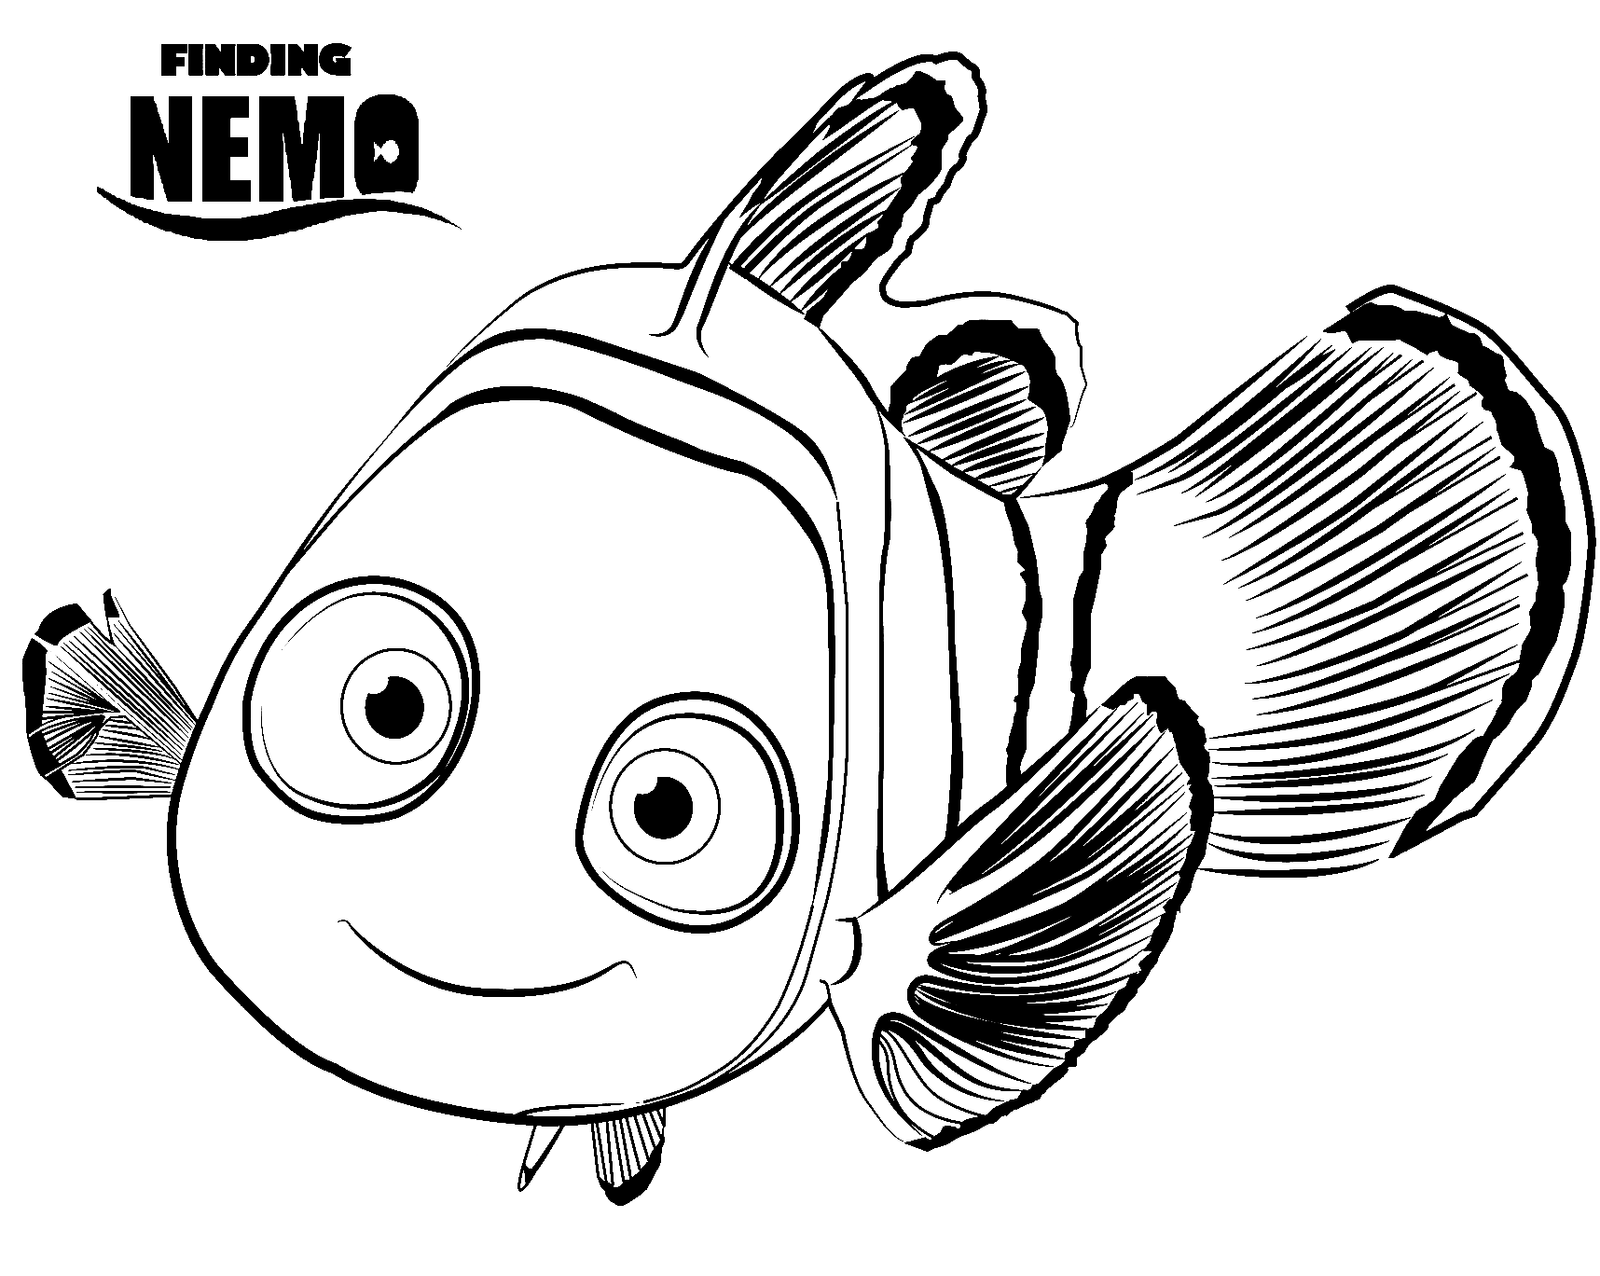 Finding nemo coloring pages printable for free download